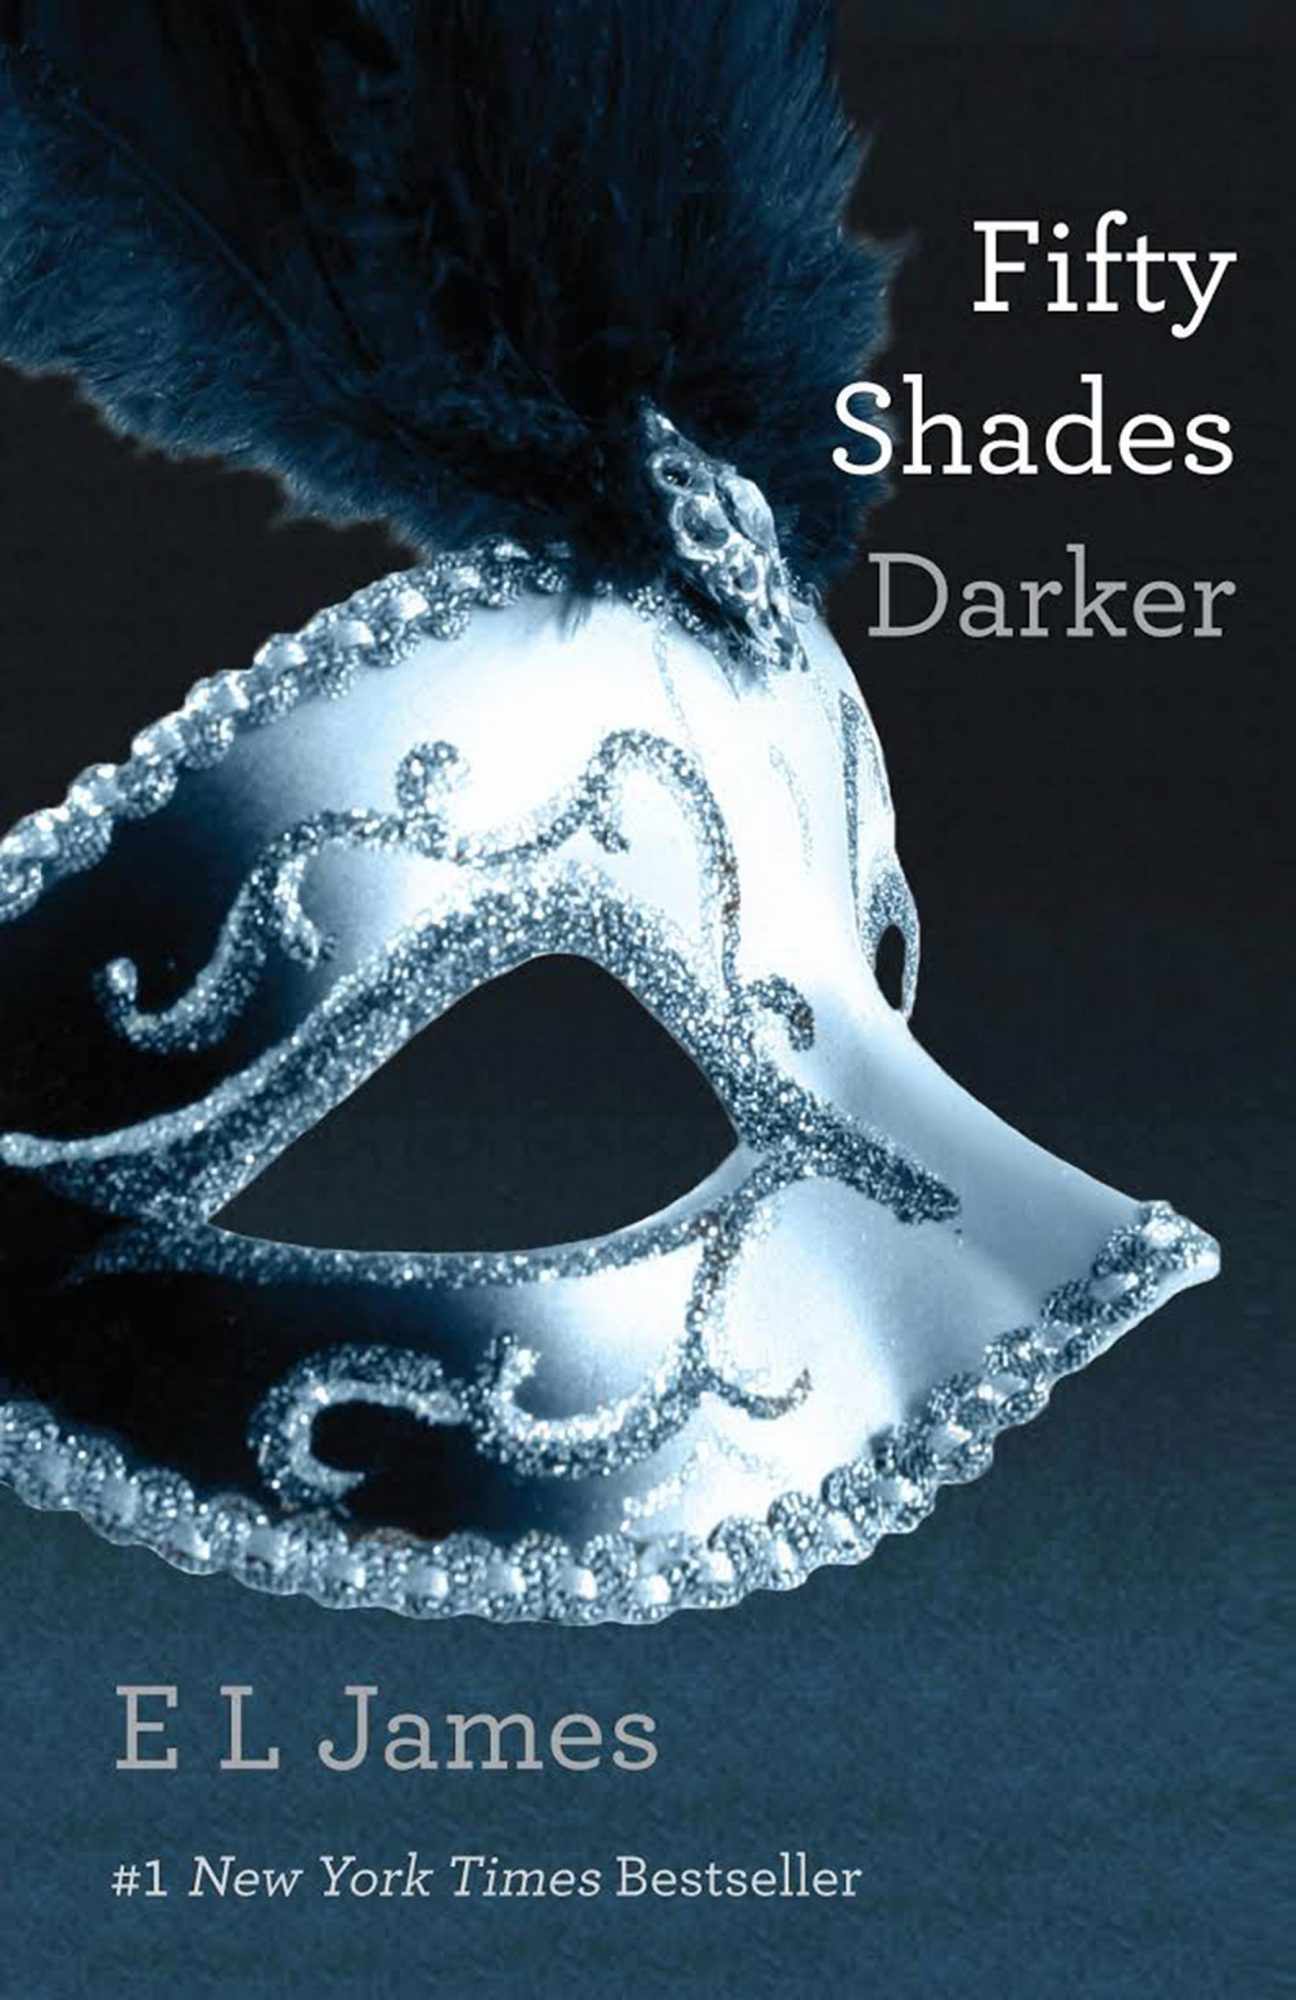 Fifty Shades Darker&nbsp;and Fifty Shades Freed, by E.L. James